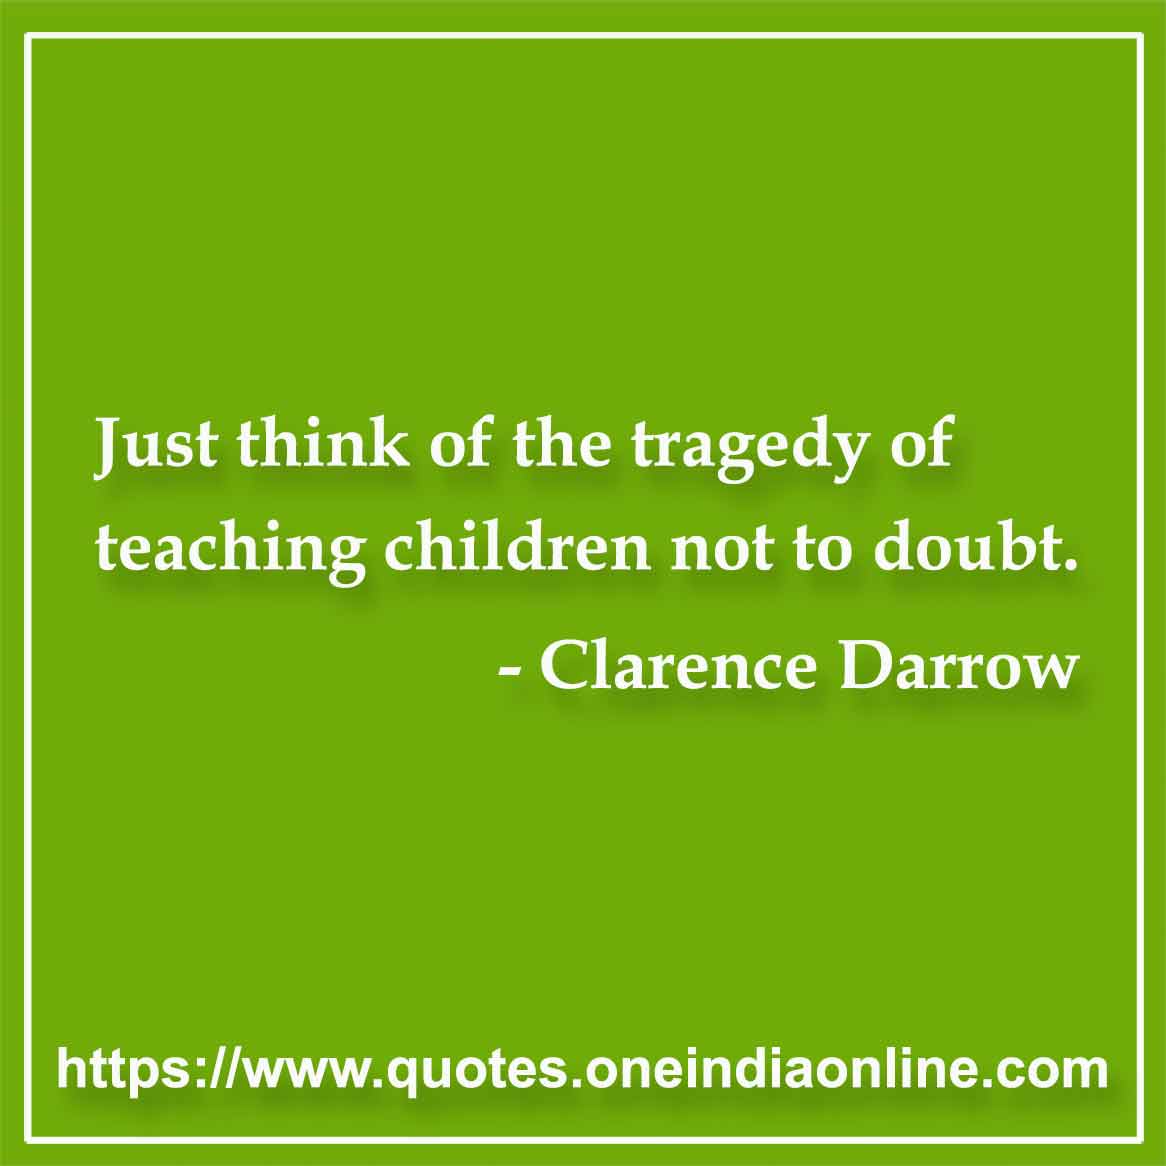 Just think of the tragedy of teaching children not to doubt.

- Clarence Darrow Quote